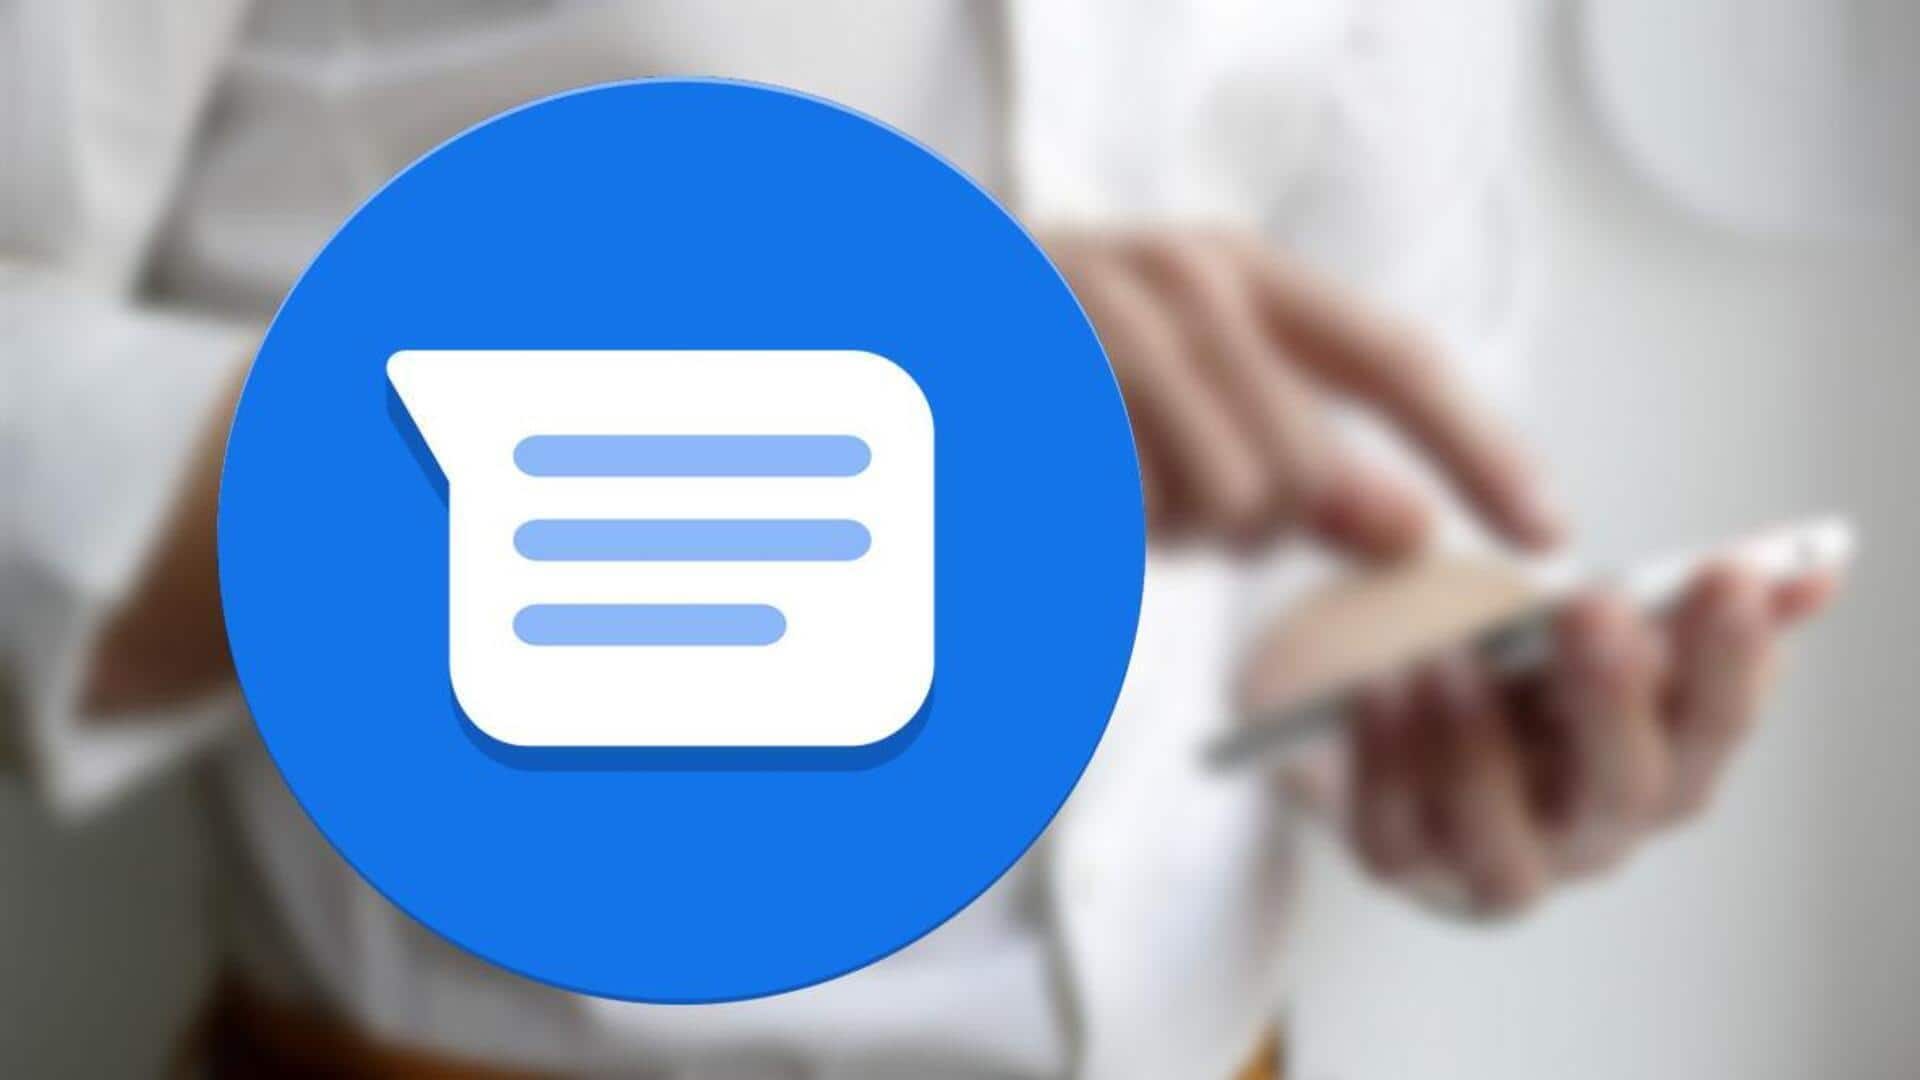 Google Messages' notification bug removes 'Reply' option for some users